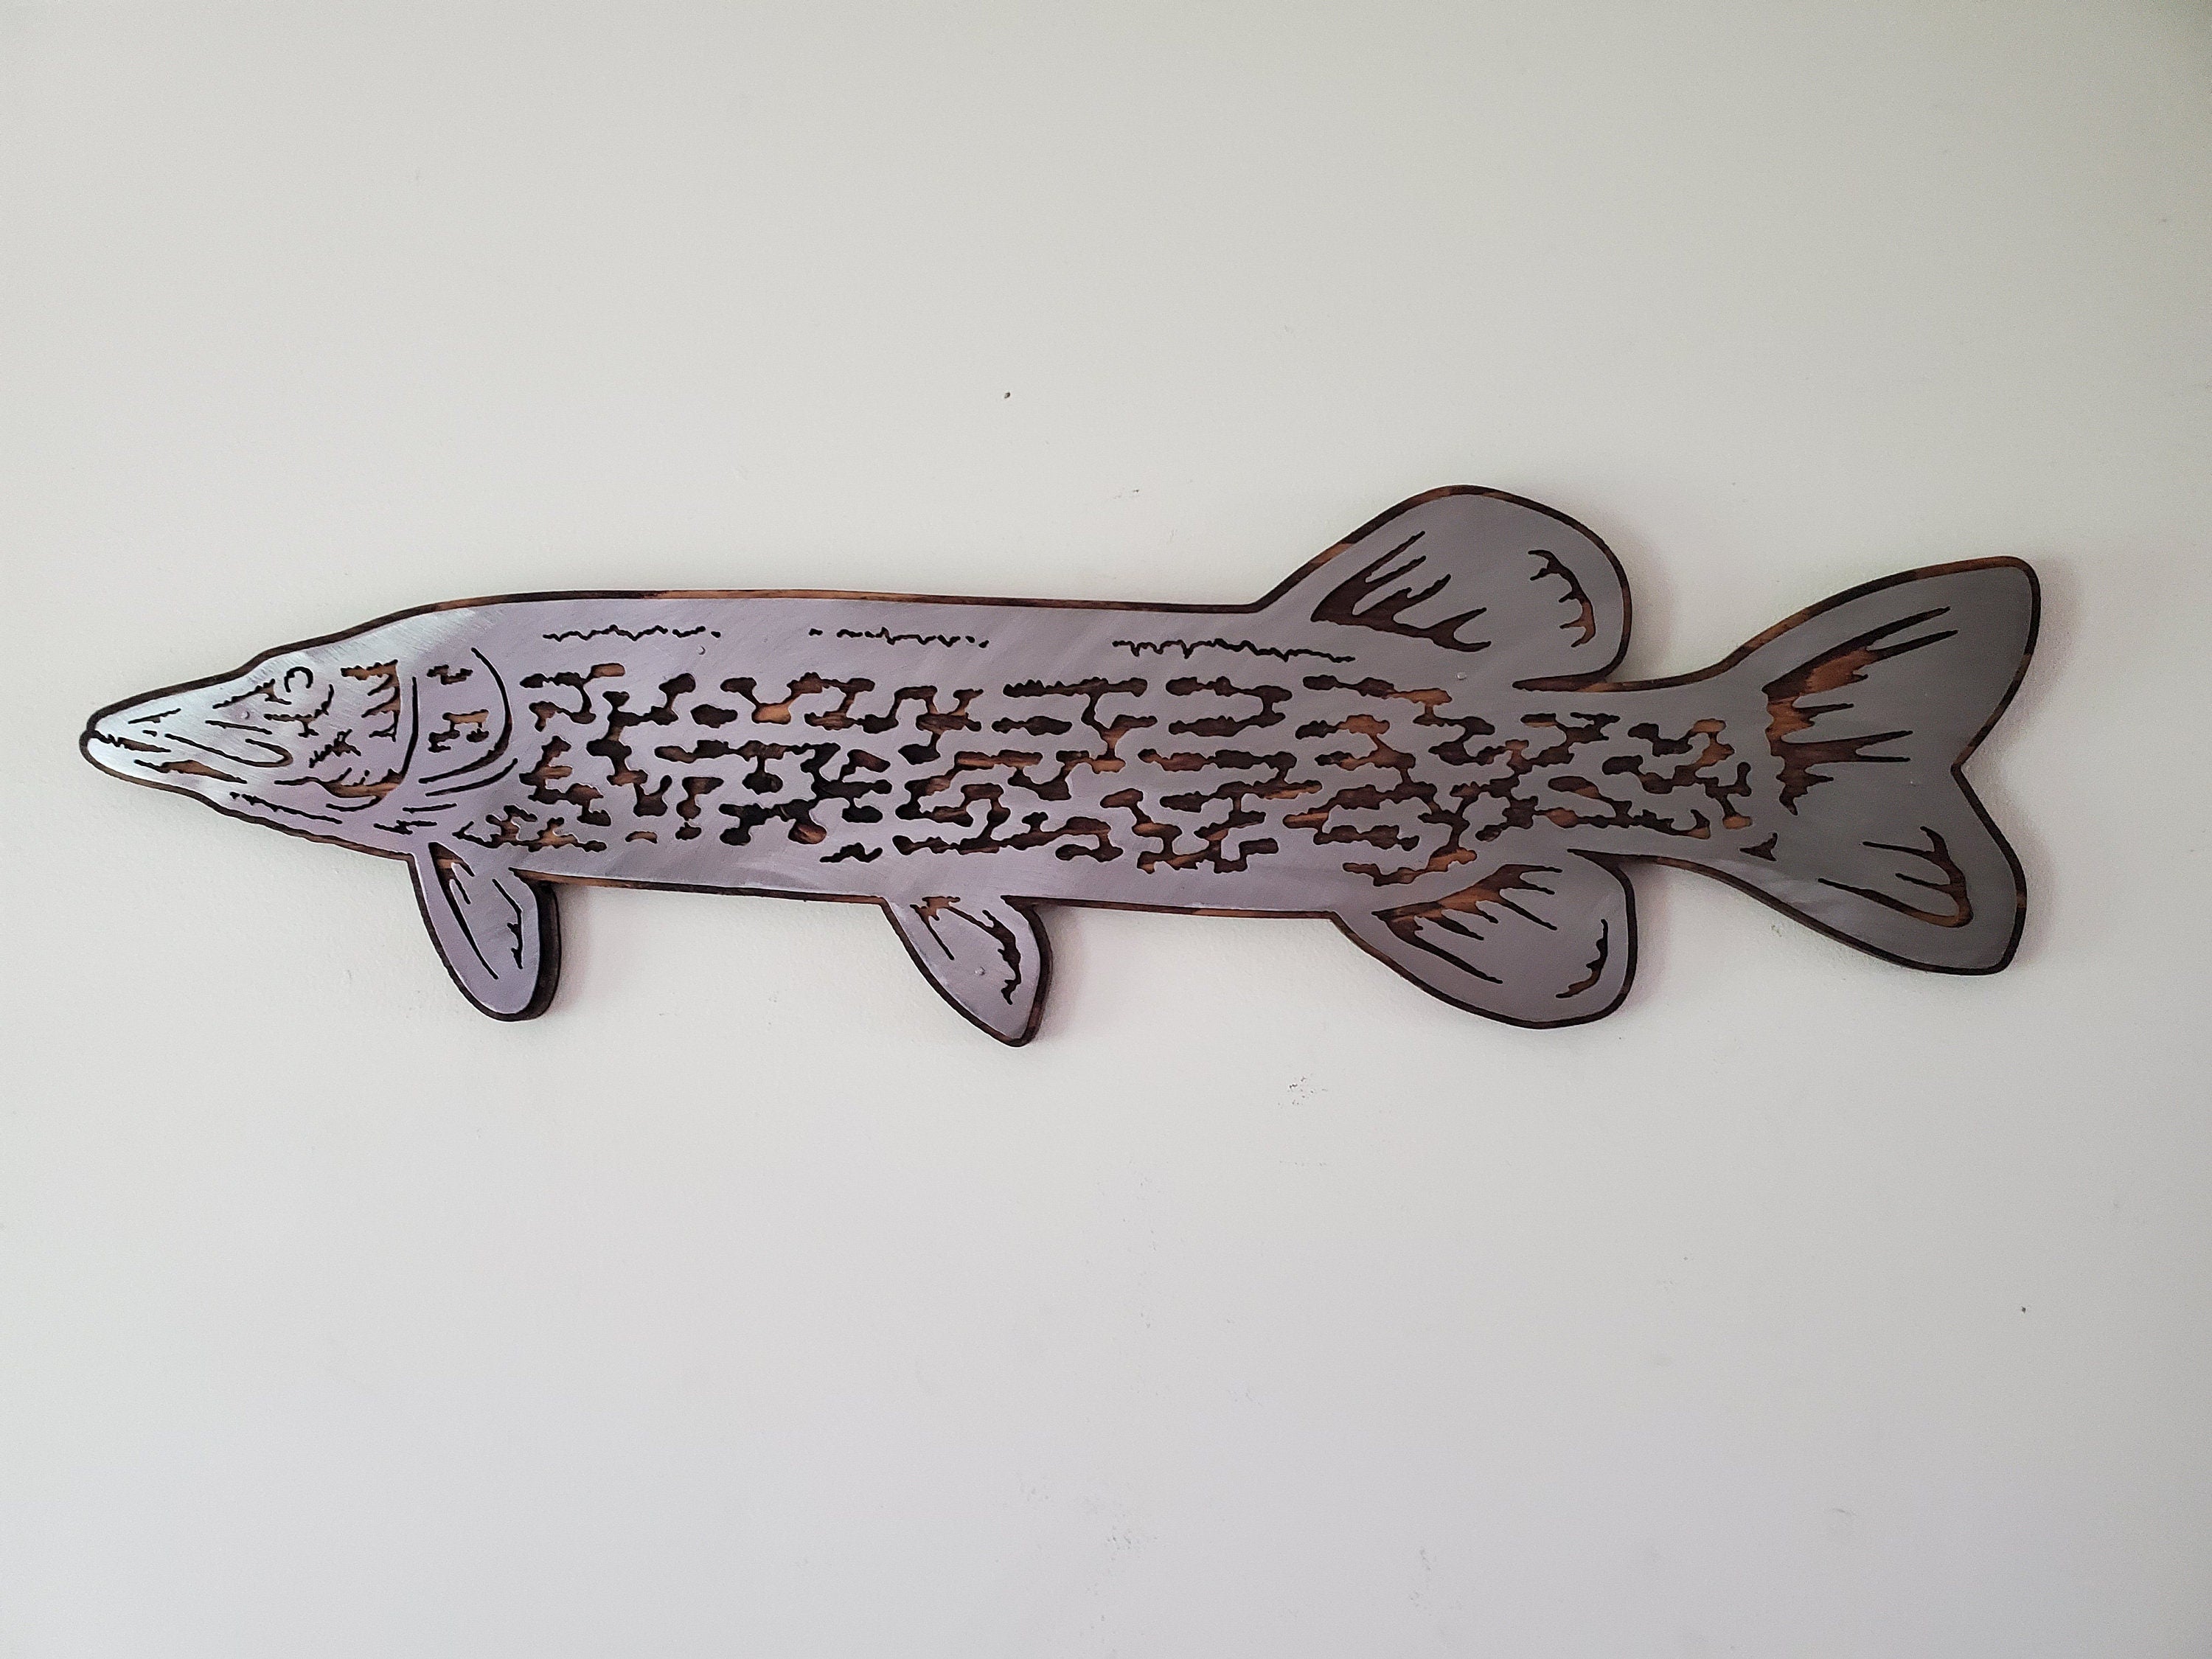 Todays Catch Rustic Hand Hammered Metal Fish Hook & Fish Cabin or